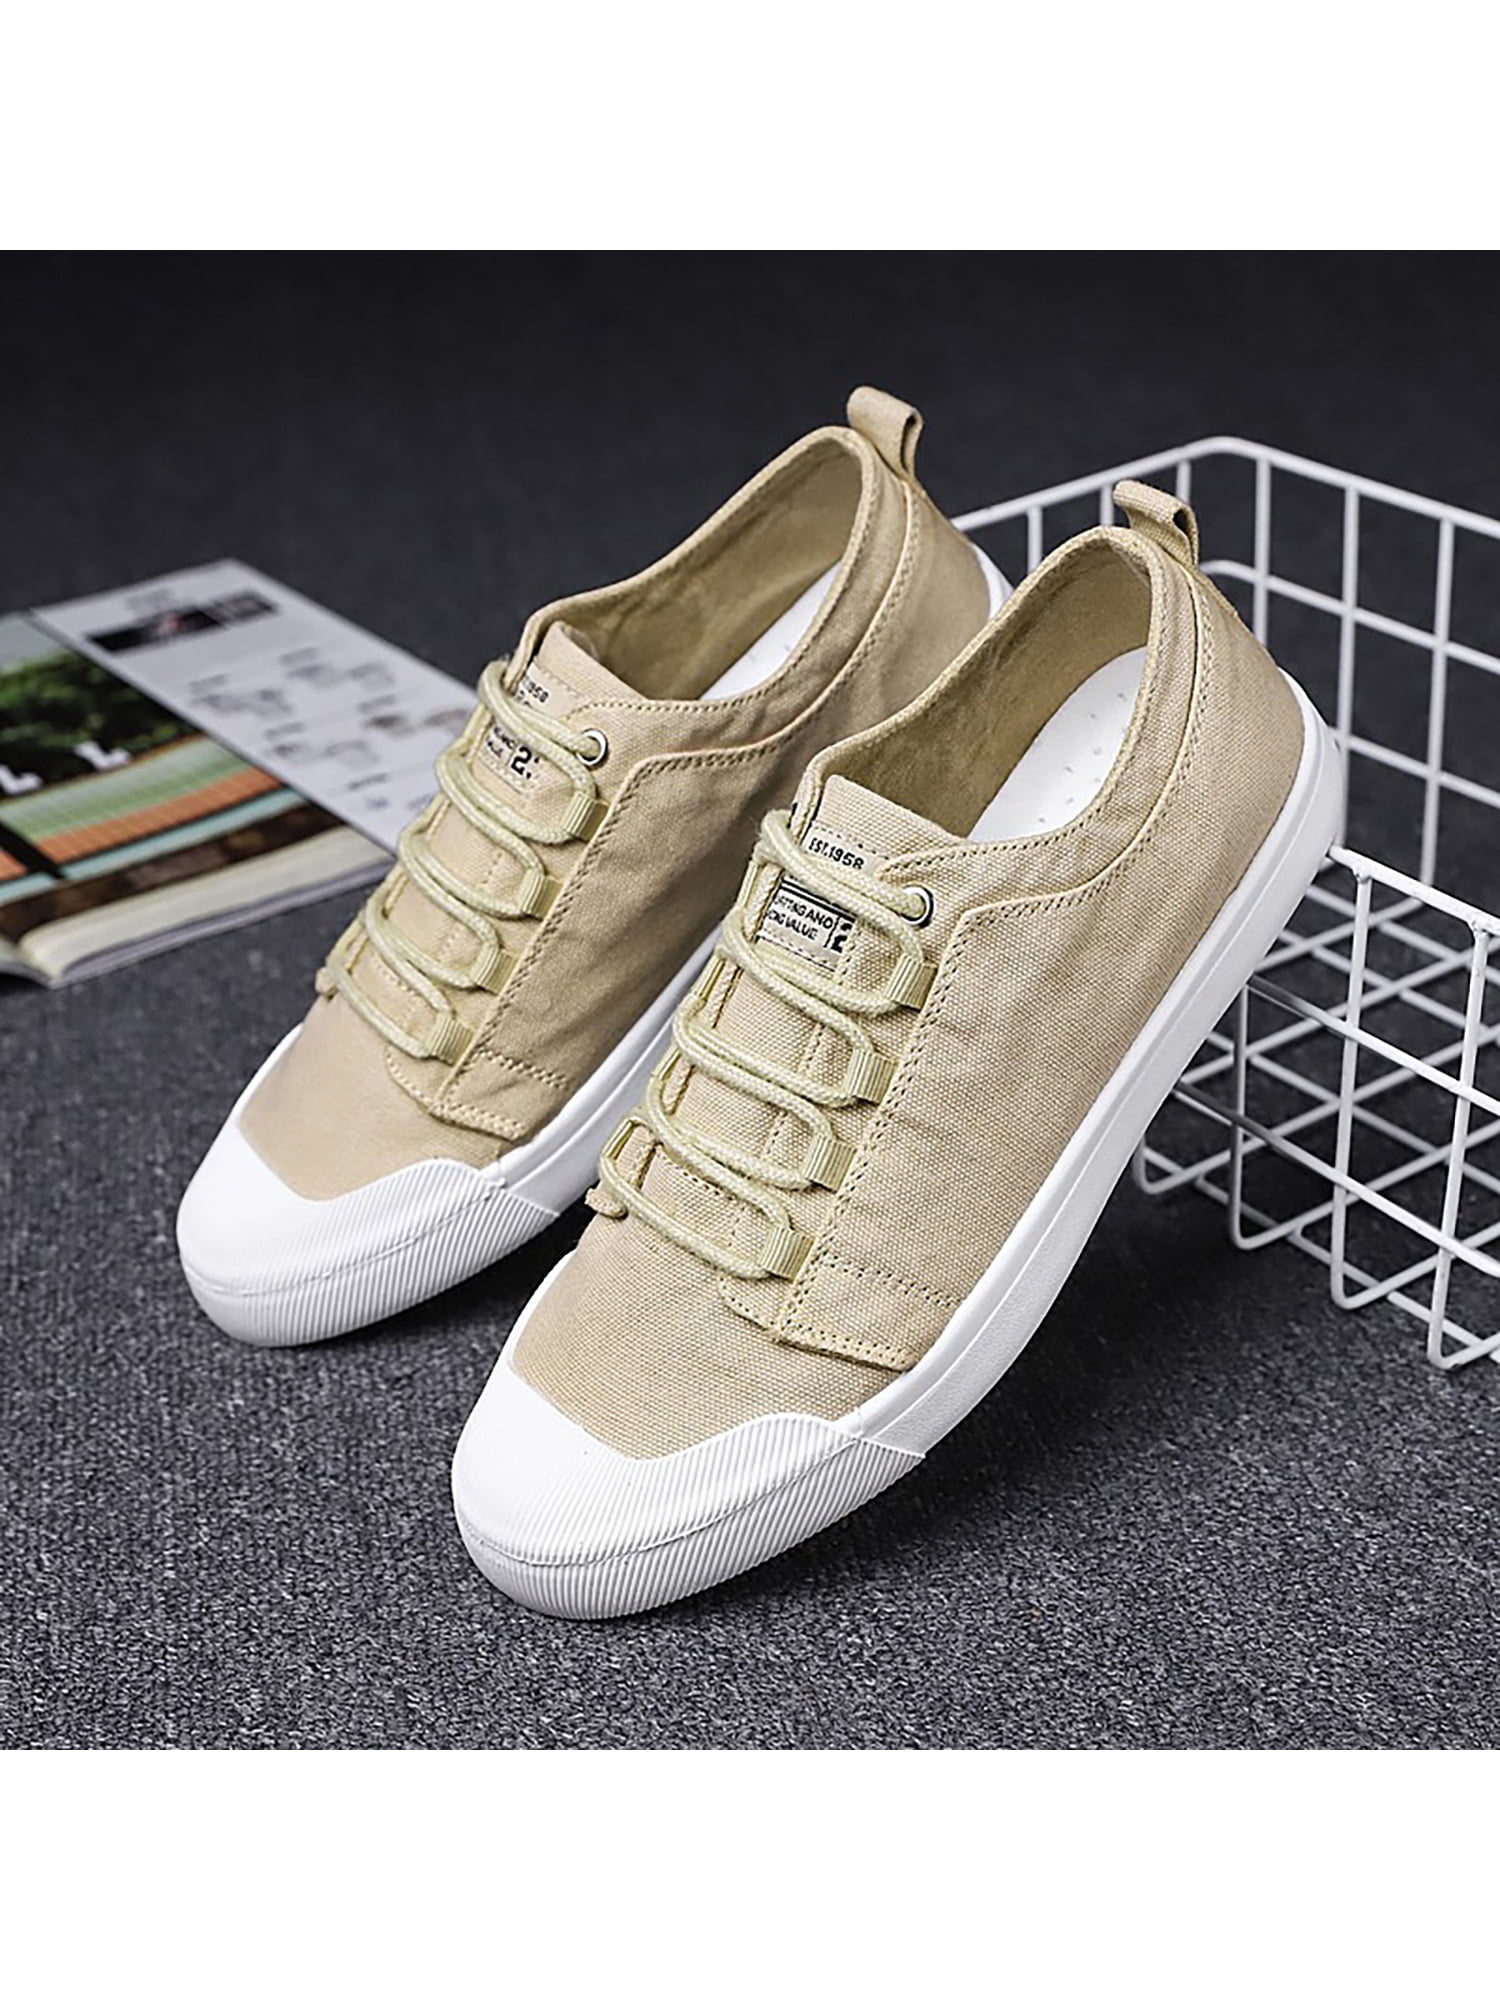 Men Lace Up Canvas Plimsoll Shoes Flat Casual Sneakers Trainers Pumps Size Comfy 